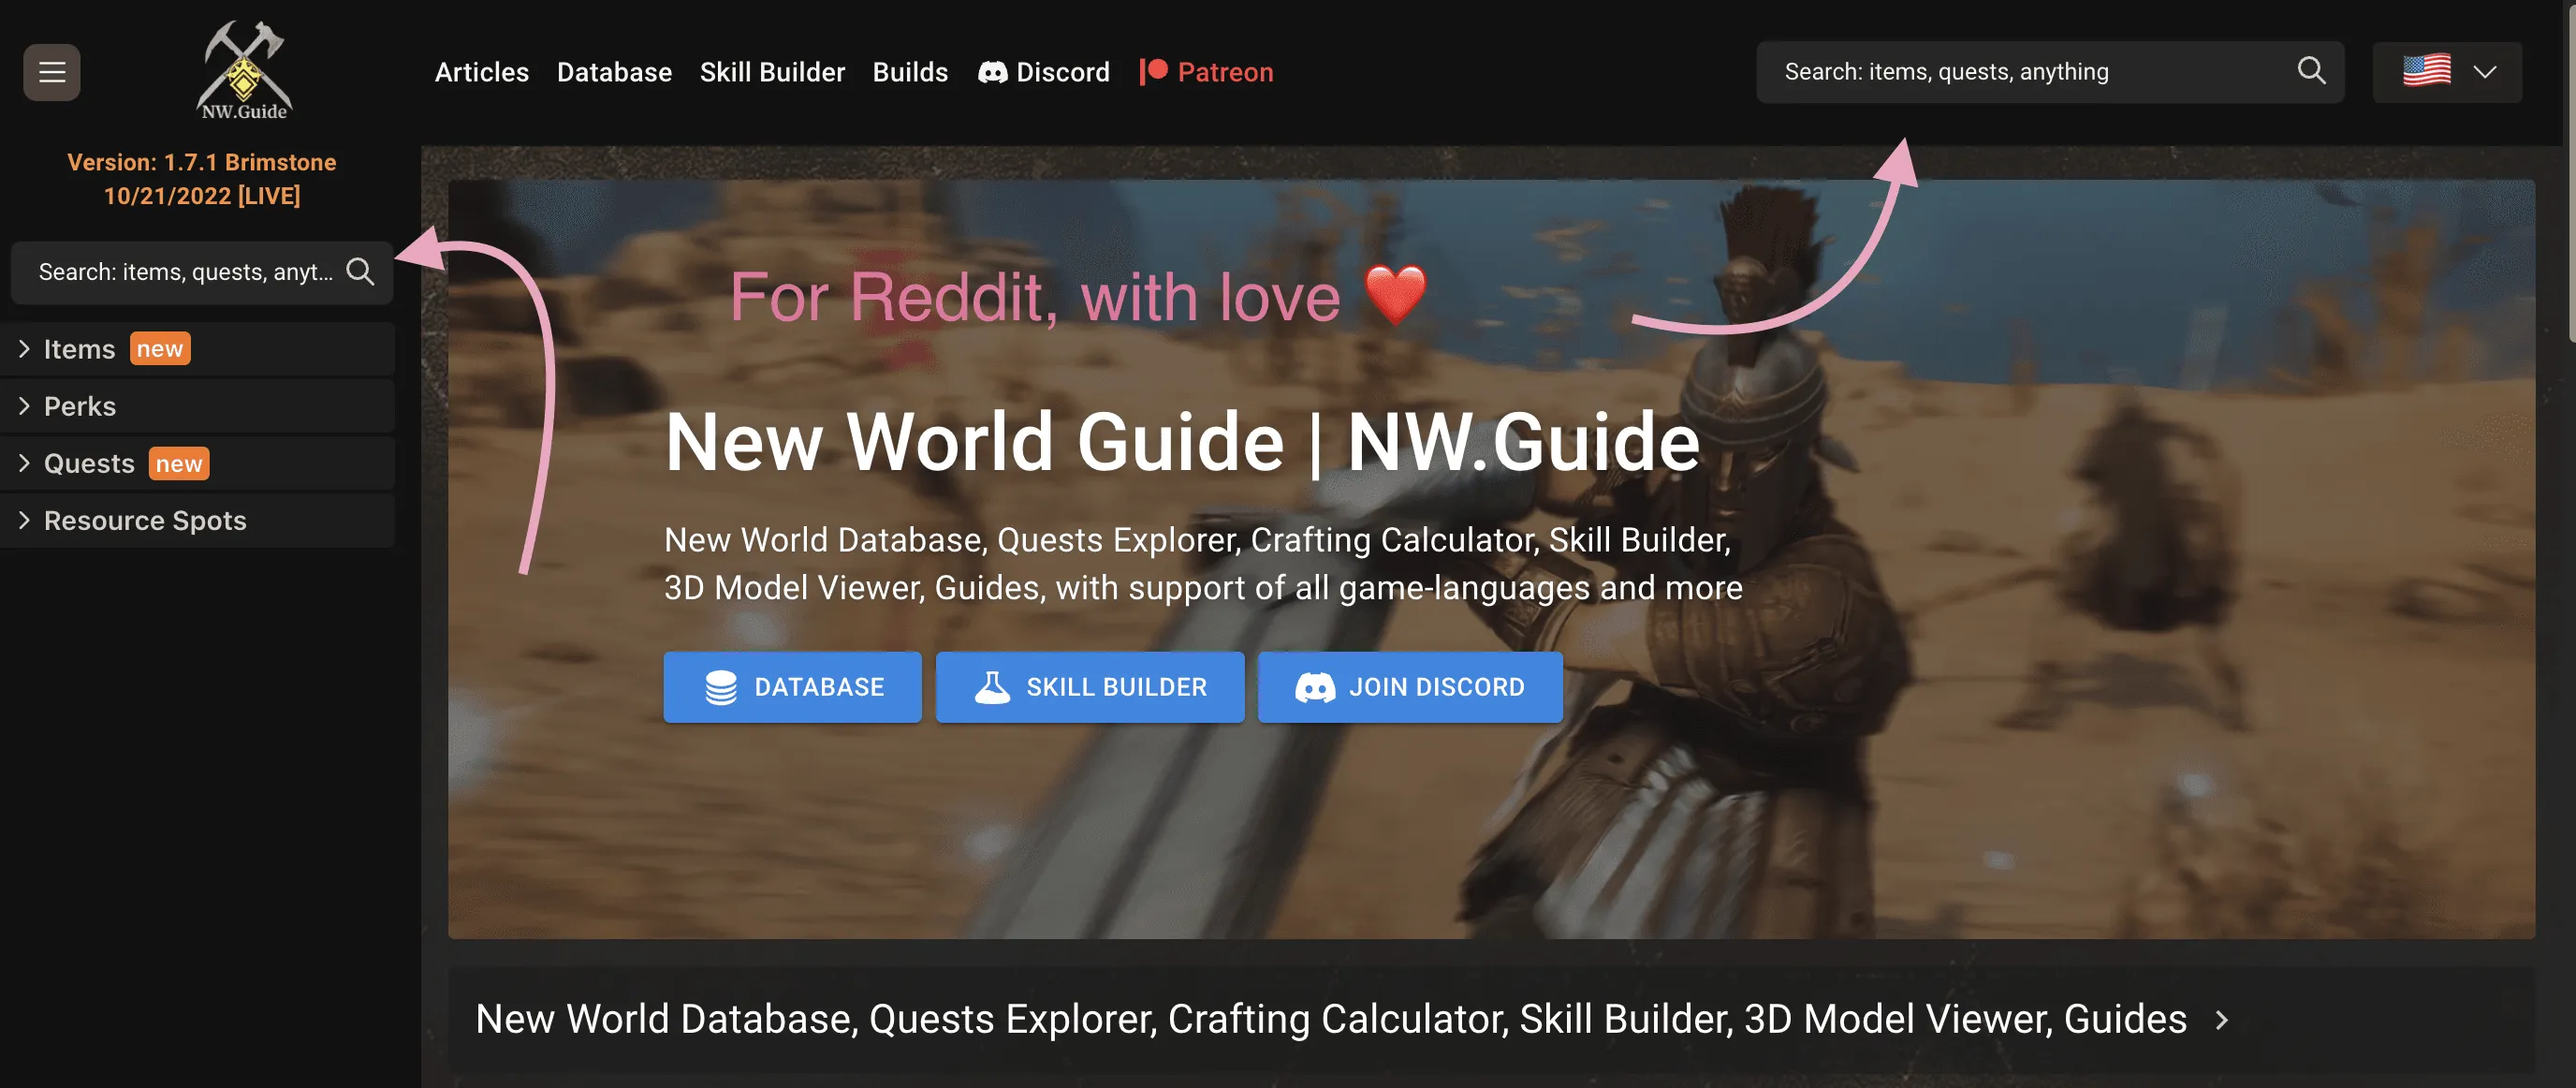 New World Guide for Reddit, with love ^_^